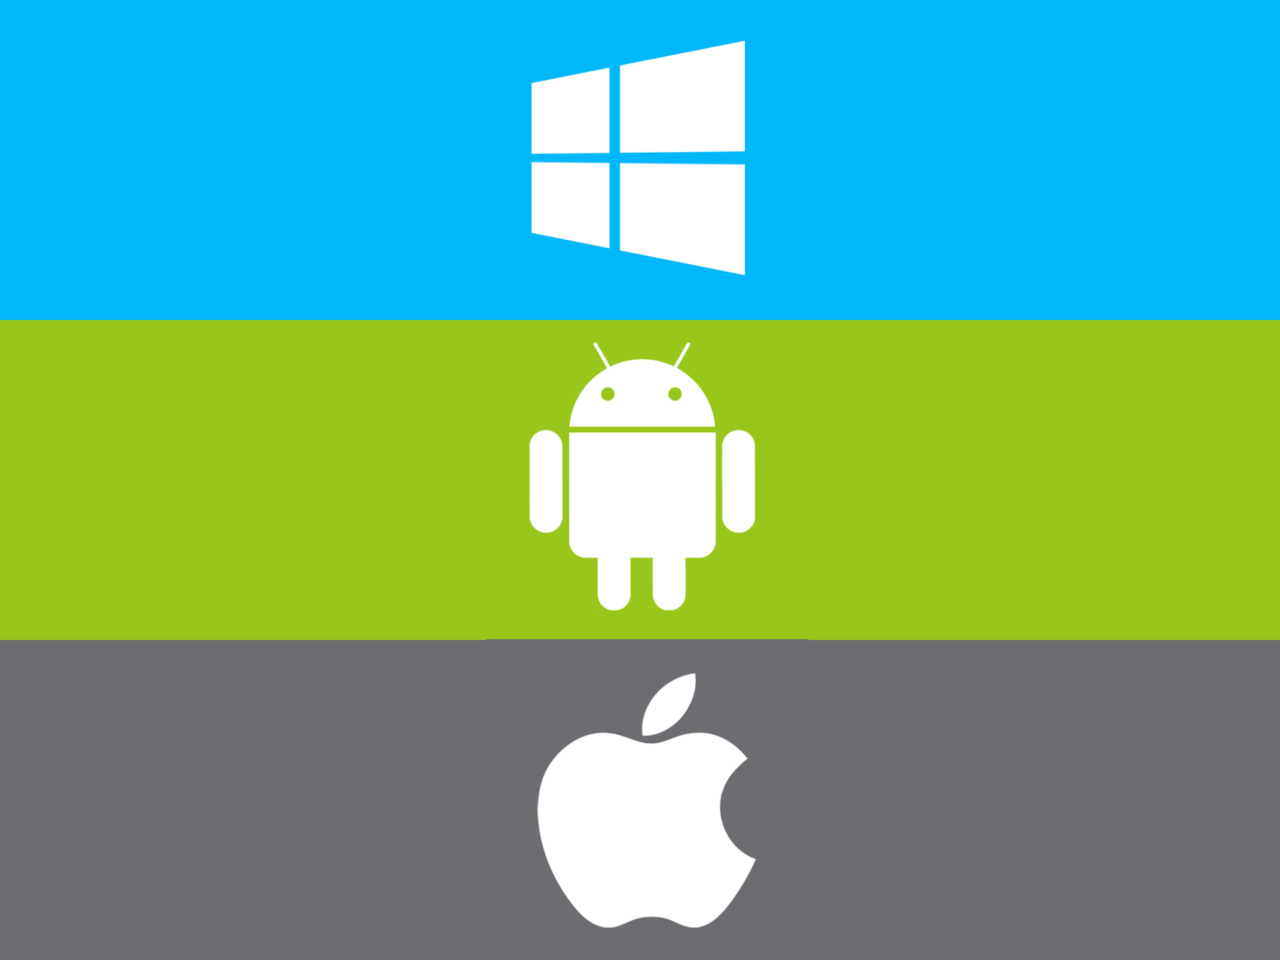 Das Windows, Apple, Android - What's Your Choice? Wallpaper 1280x960